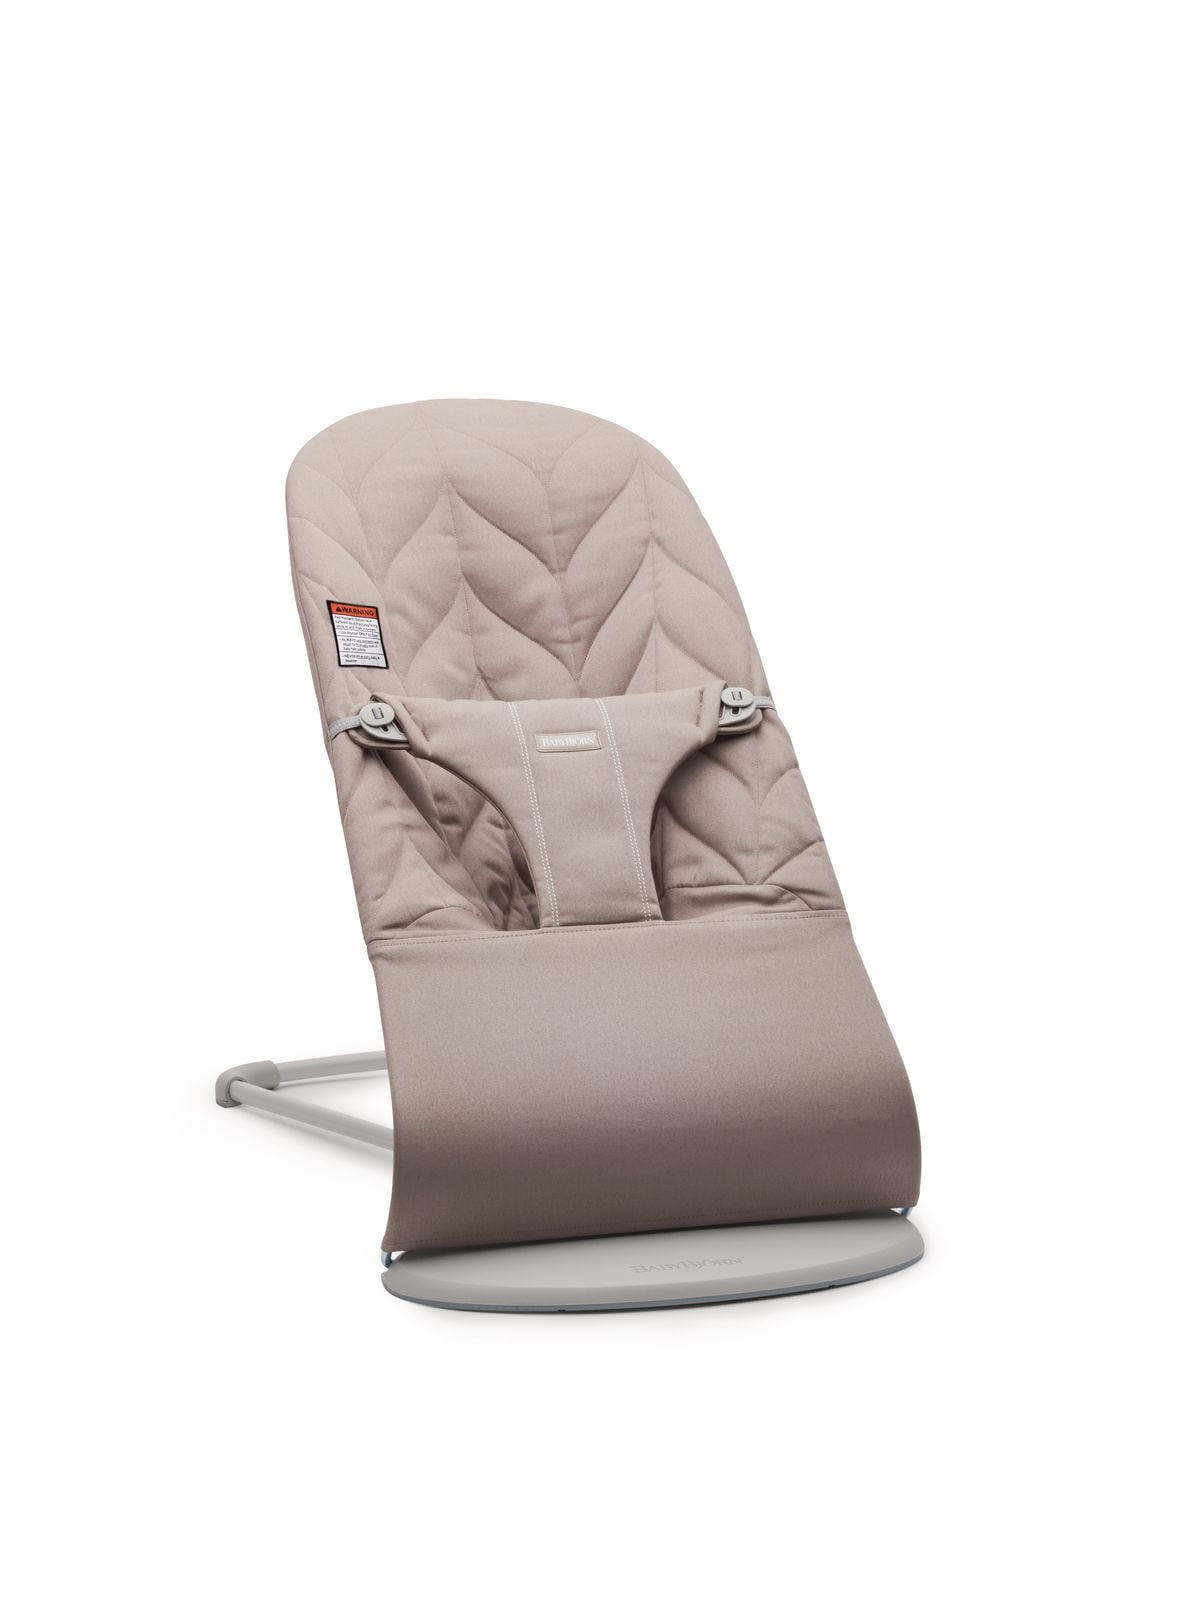  BabyBjörn Bouncer Bliss, Sand Gray, Cotton (006017US) : Baby